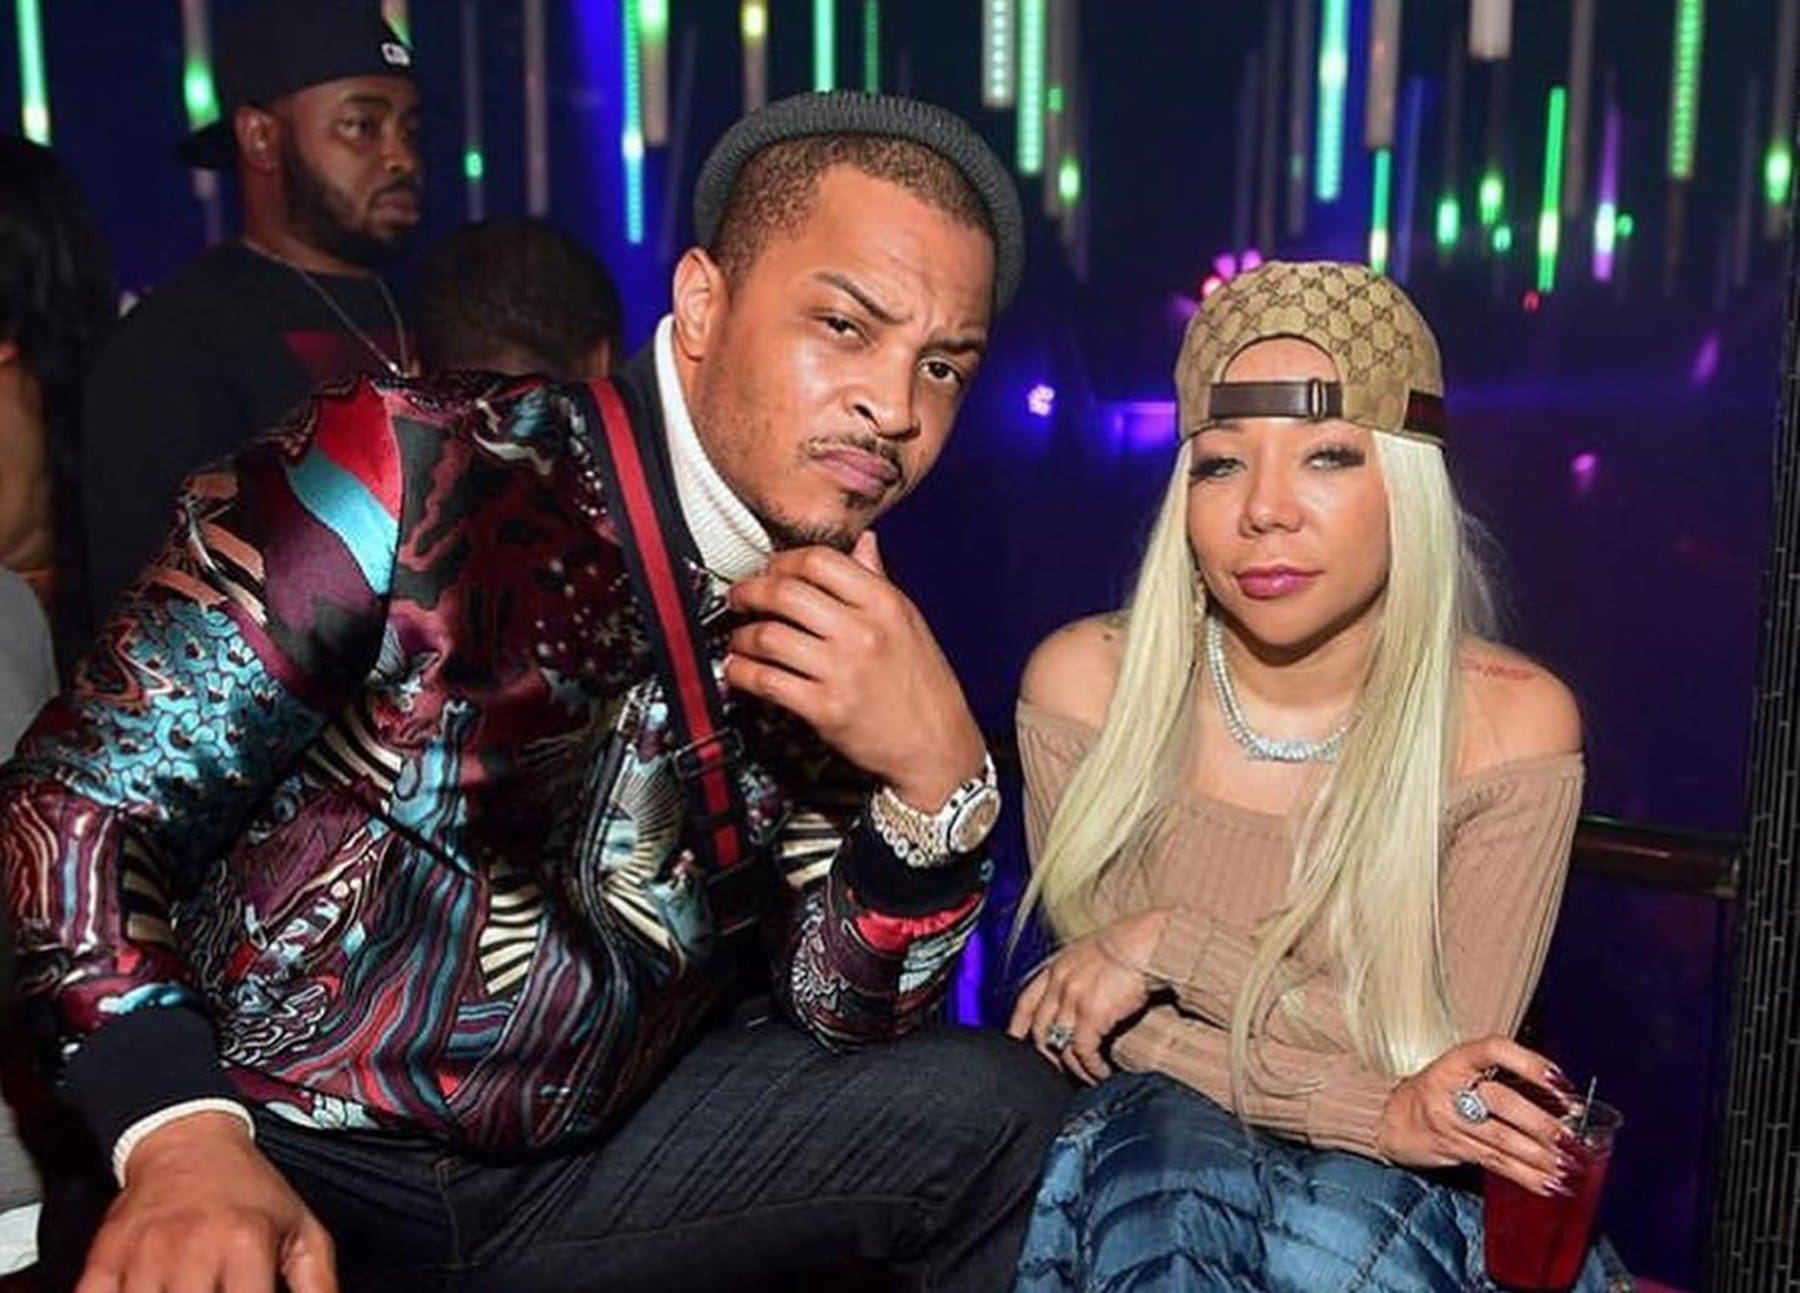 Tiny Harris Teases Her Fans With A Potential Pregnancy - T.I. And His Wife Seem To Have Some Baby Making Planned During Social Distancing